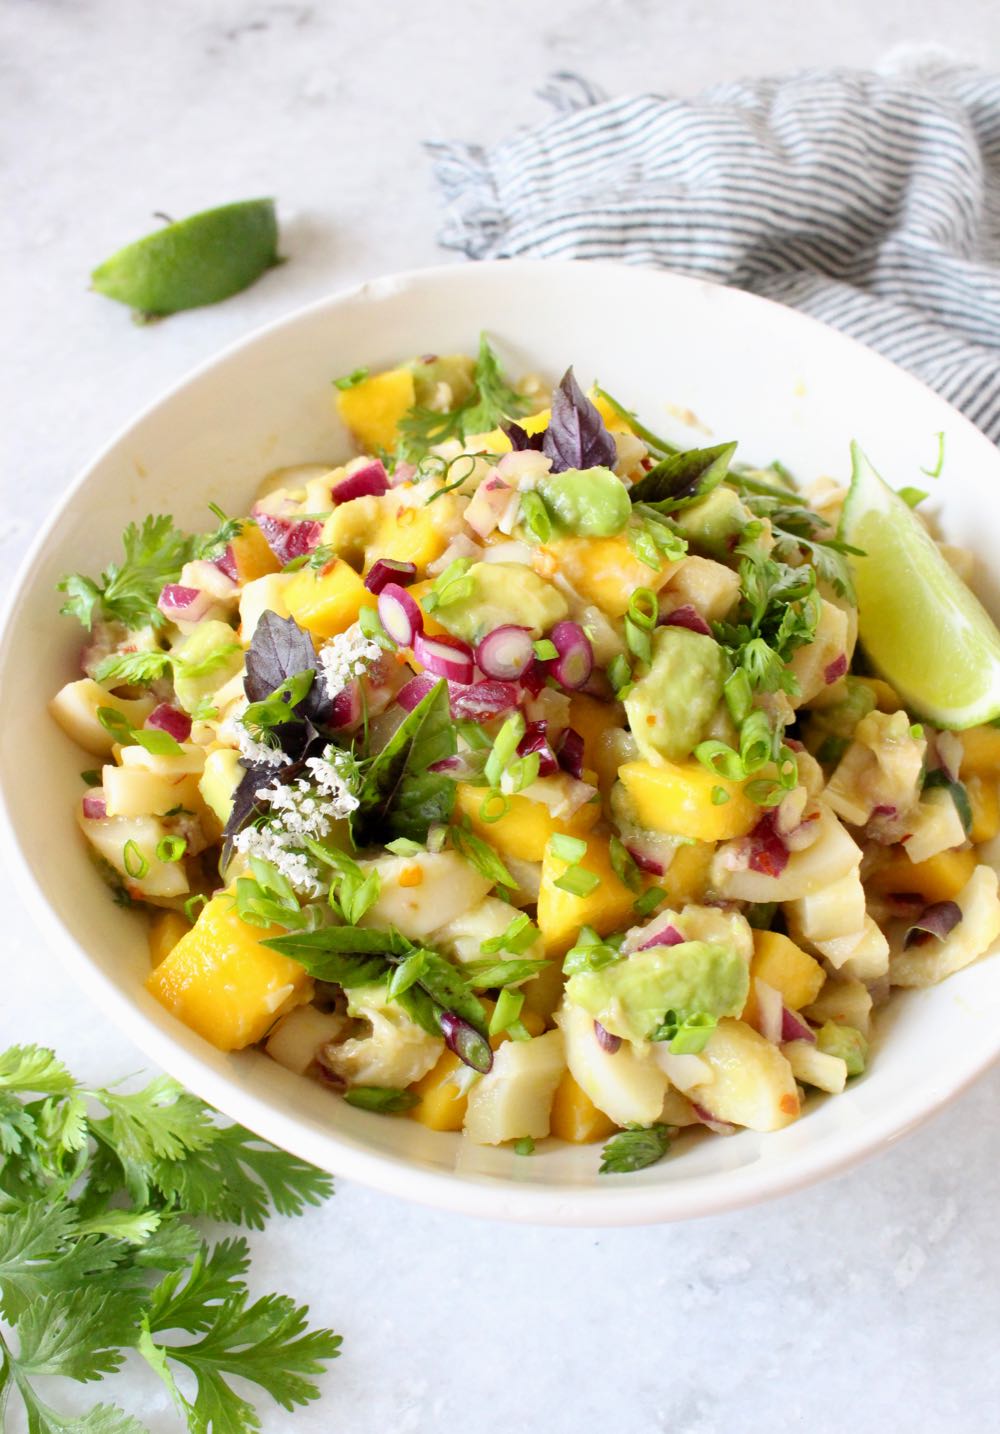 Best vegan ceviche with mango, avocado and lime